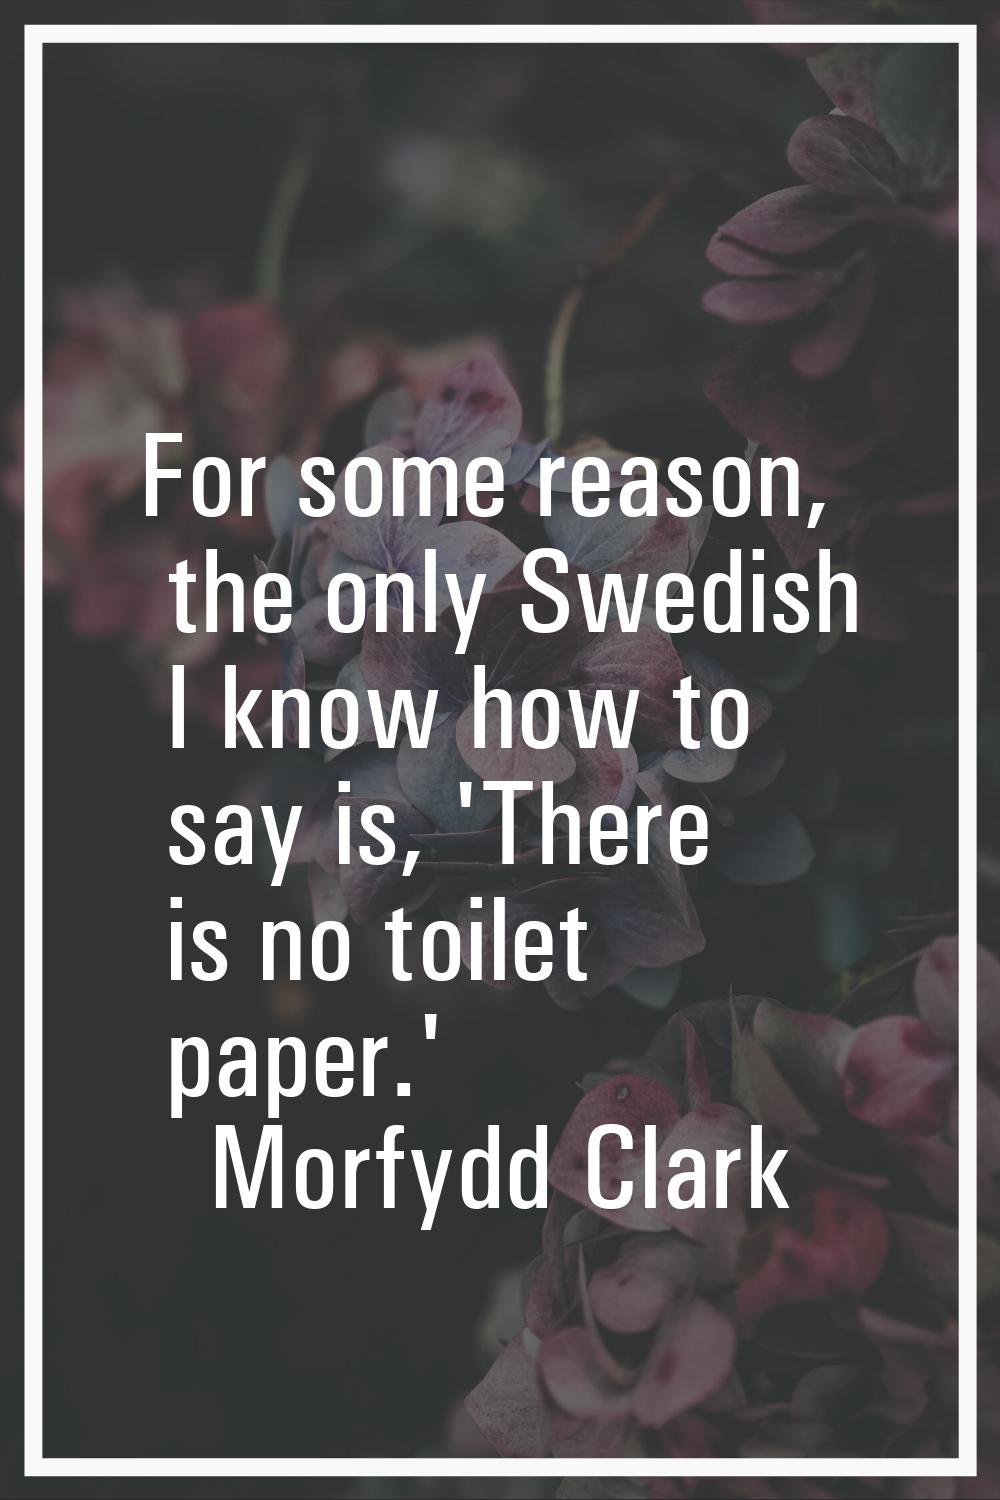 For some reason, the only Swedish I know how to say is, 'There is no toilet paper.'